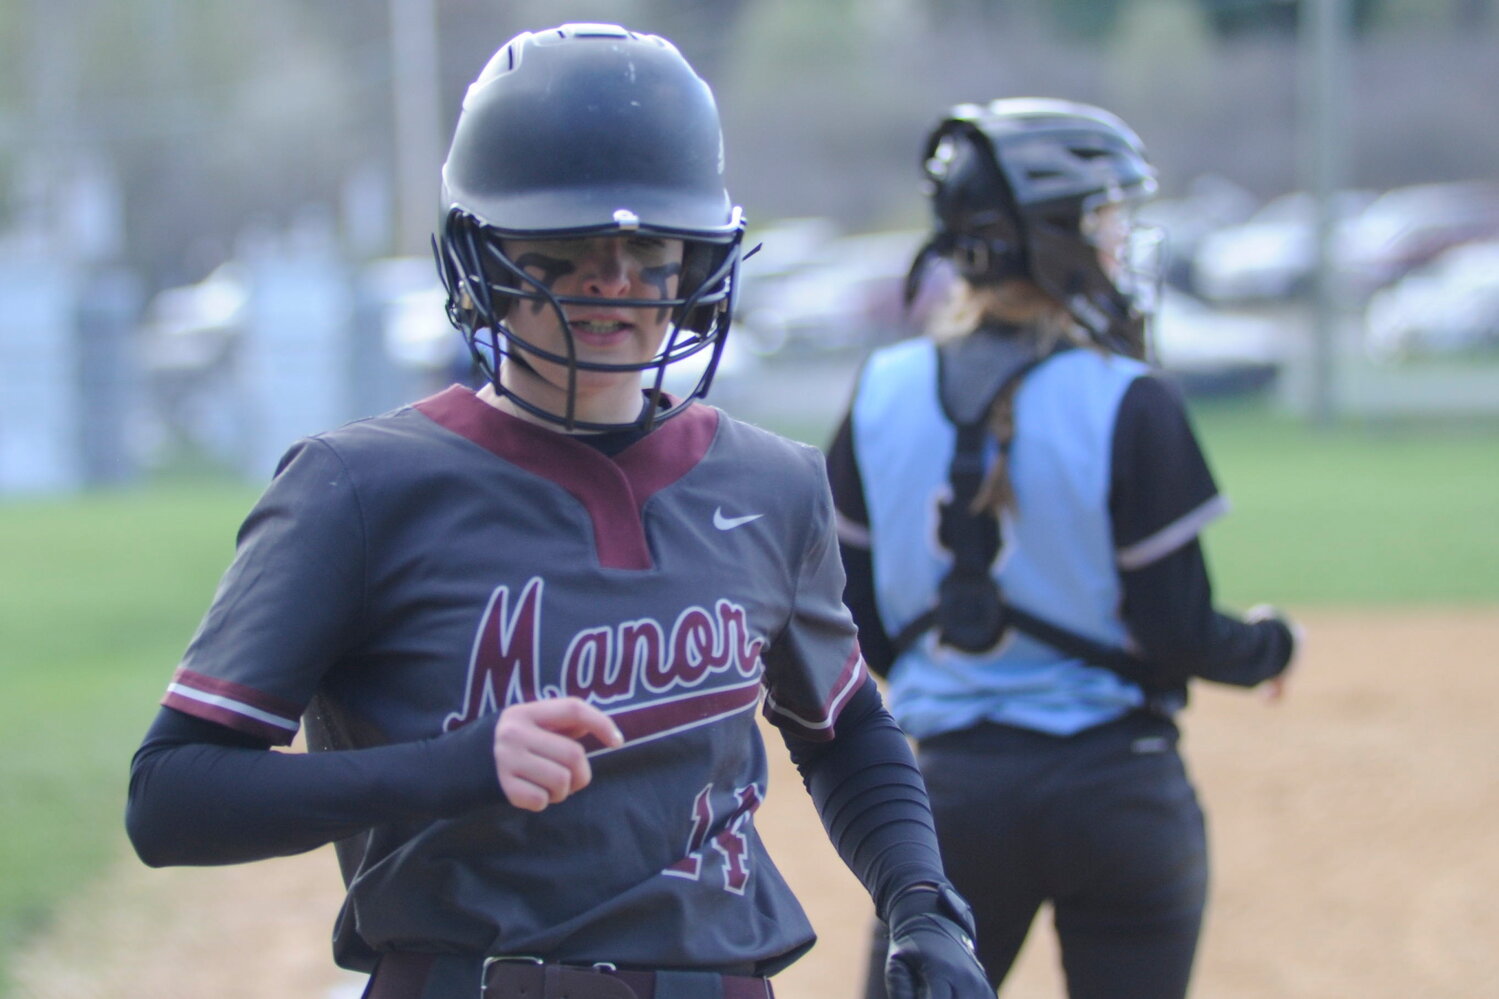 Score one for the visitors. Manor’s Jillian Carlsen adds a run to the Lady Wildcats’ 8-6 victory.